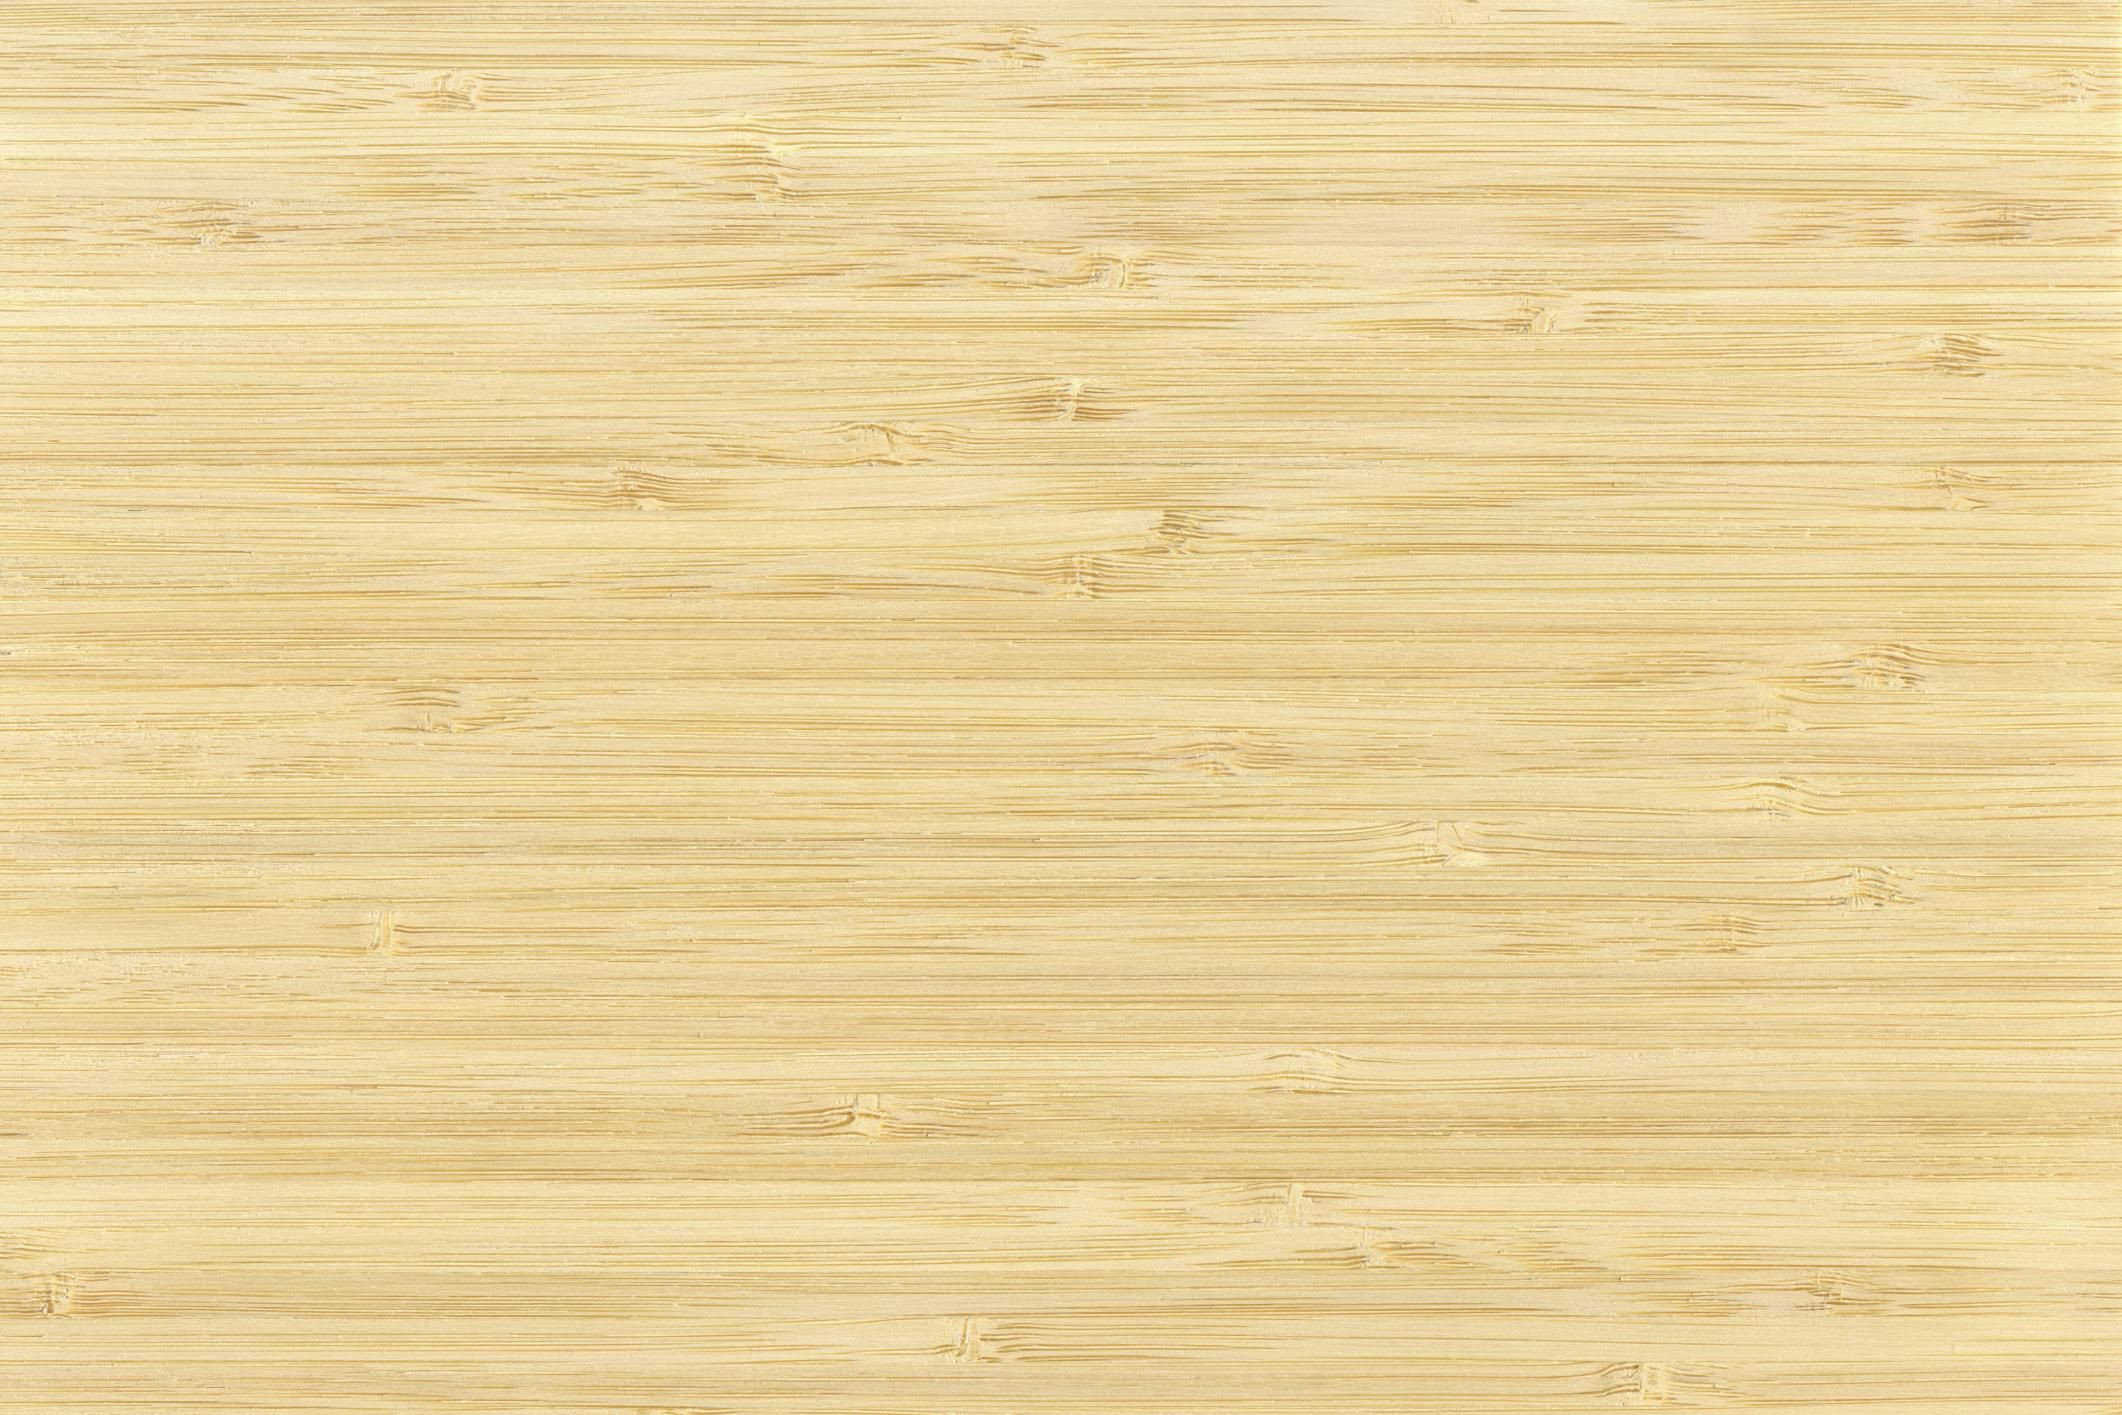 14 Unique How Good is Bamboo Hardwood Flooring 2024 free download how good is bamboo hardwood flooring of bamboo flooring in a bathroom things to consider regarding 182740579 56a2fd883df78cf7727b6d14